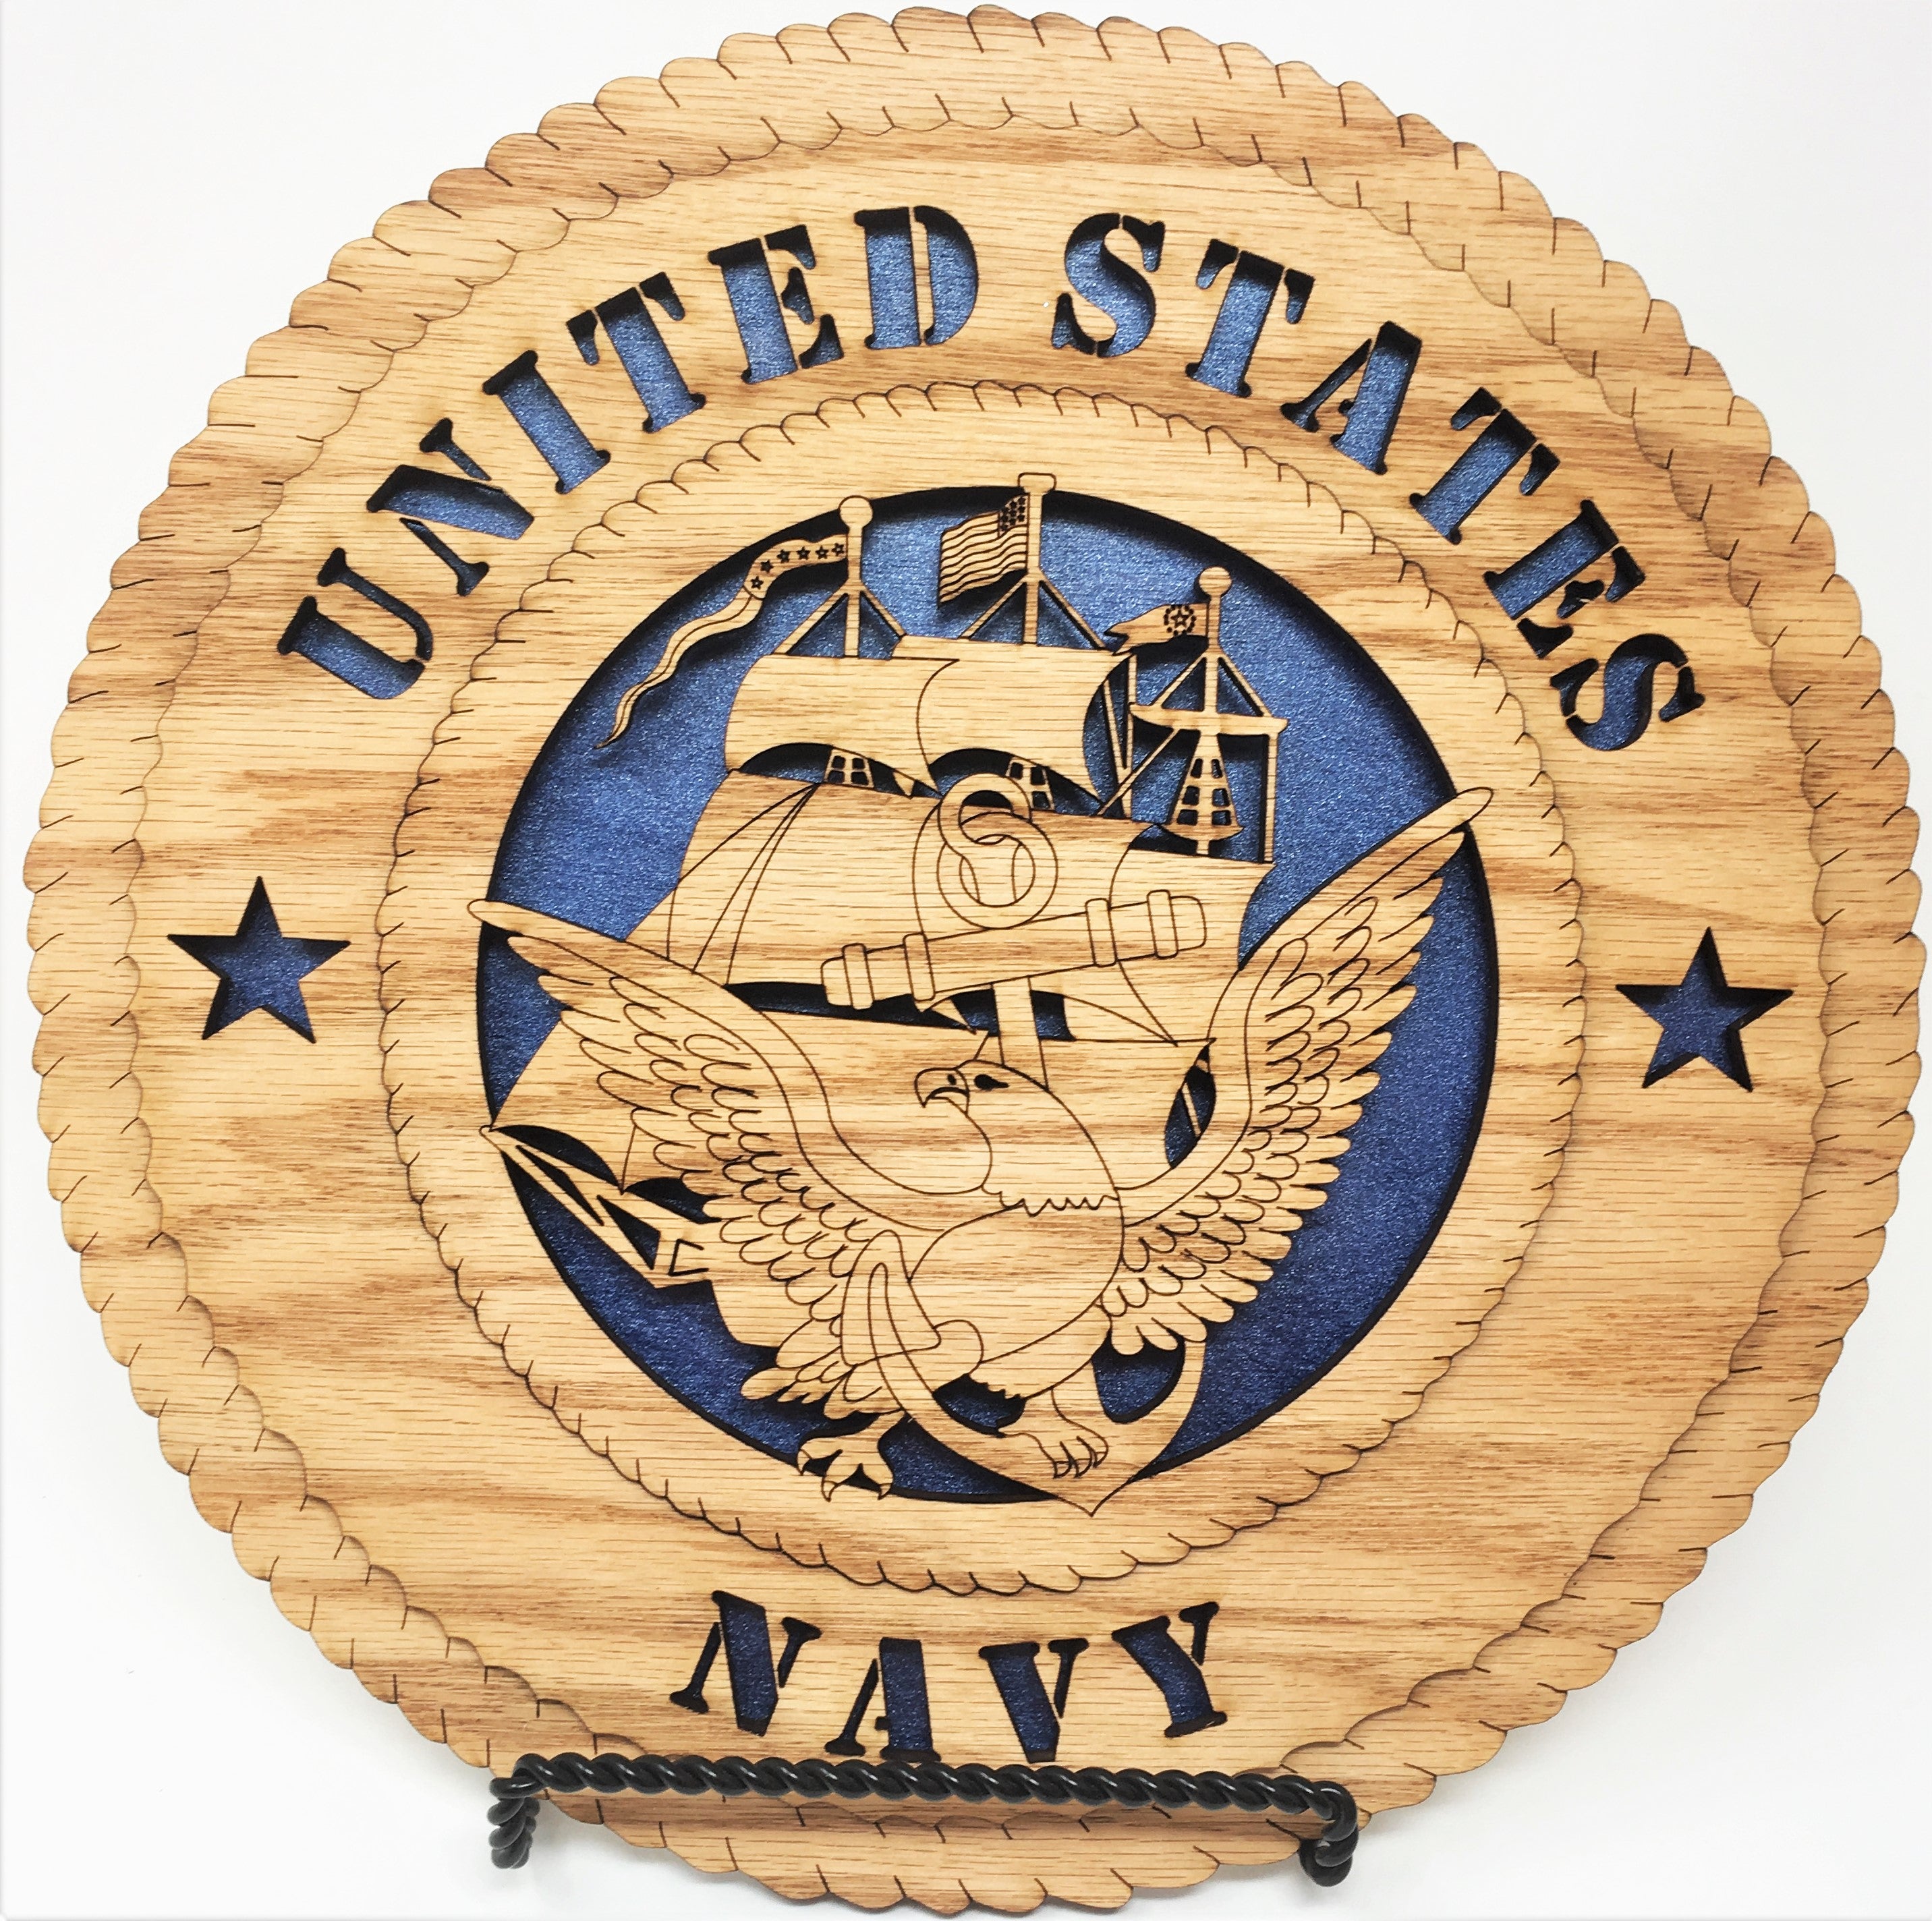 Laser Pics and Gifts: 12" Standard Navy Ship Plaque - Laser Pics & Gifts